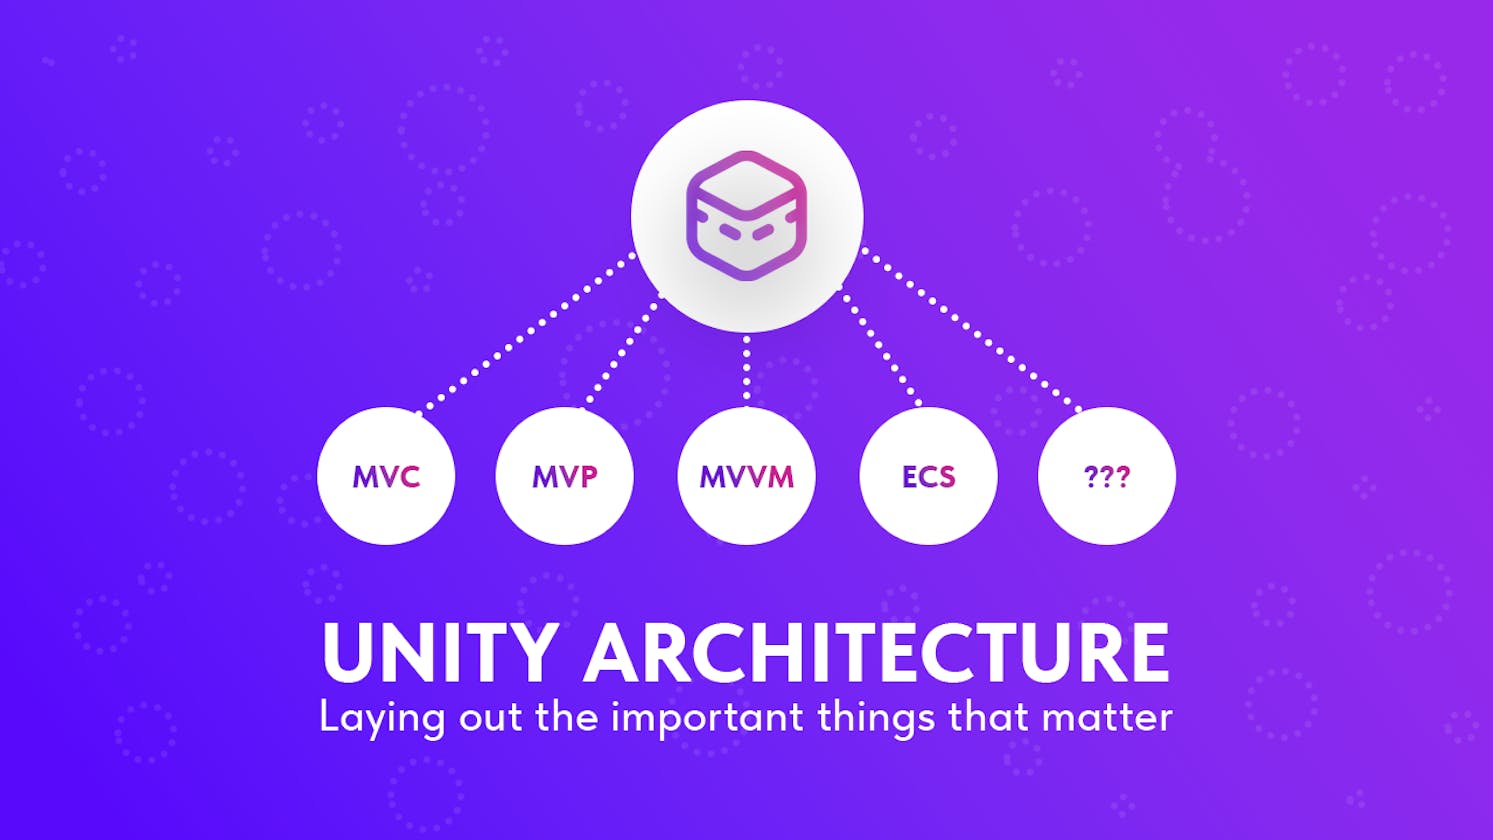 Organizing architecture for games on Unity: Laying out the important things that matter